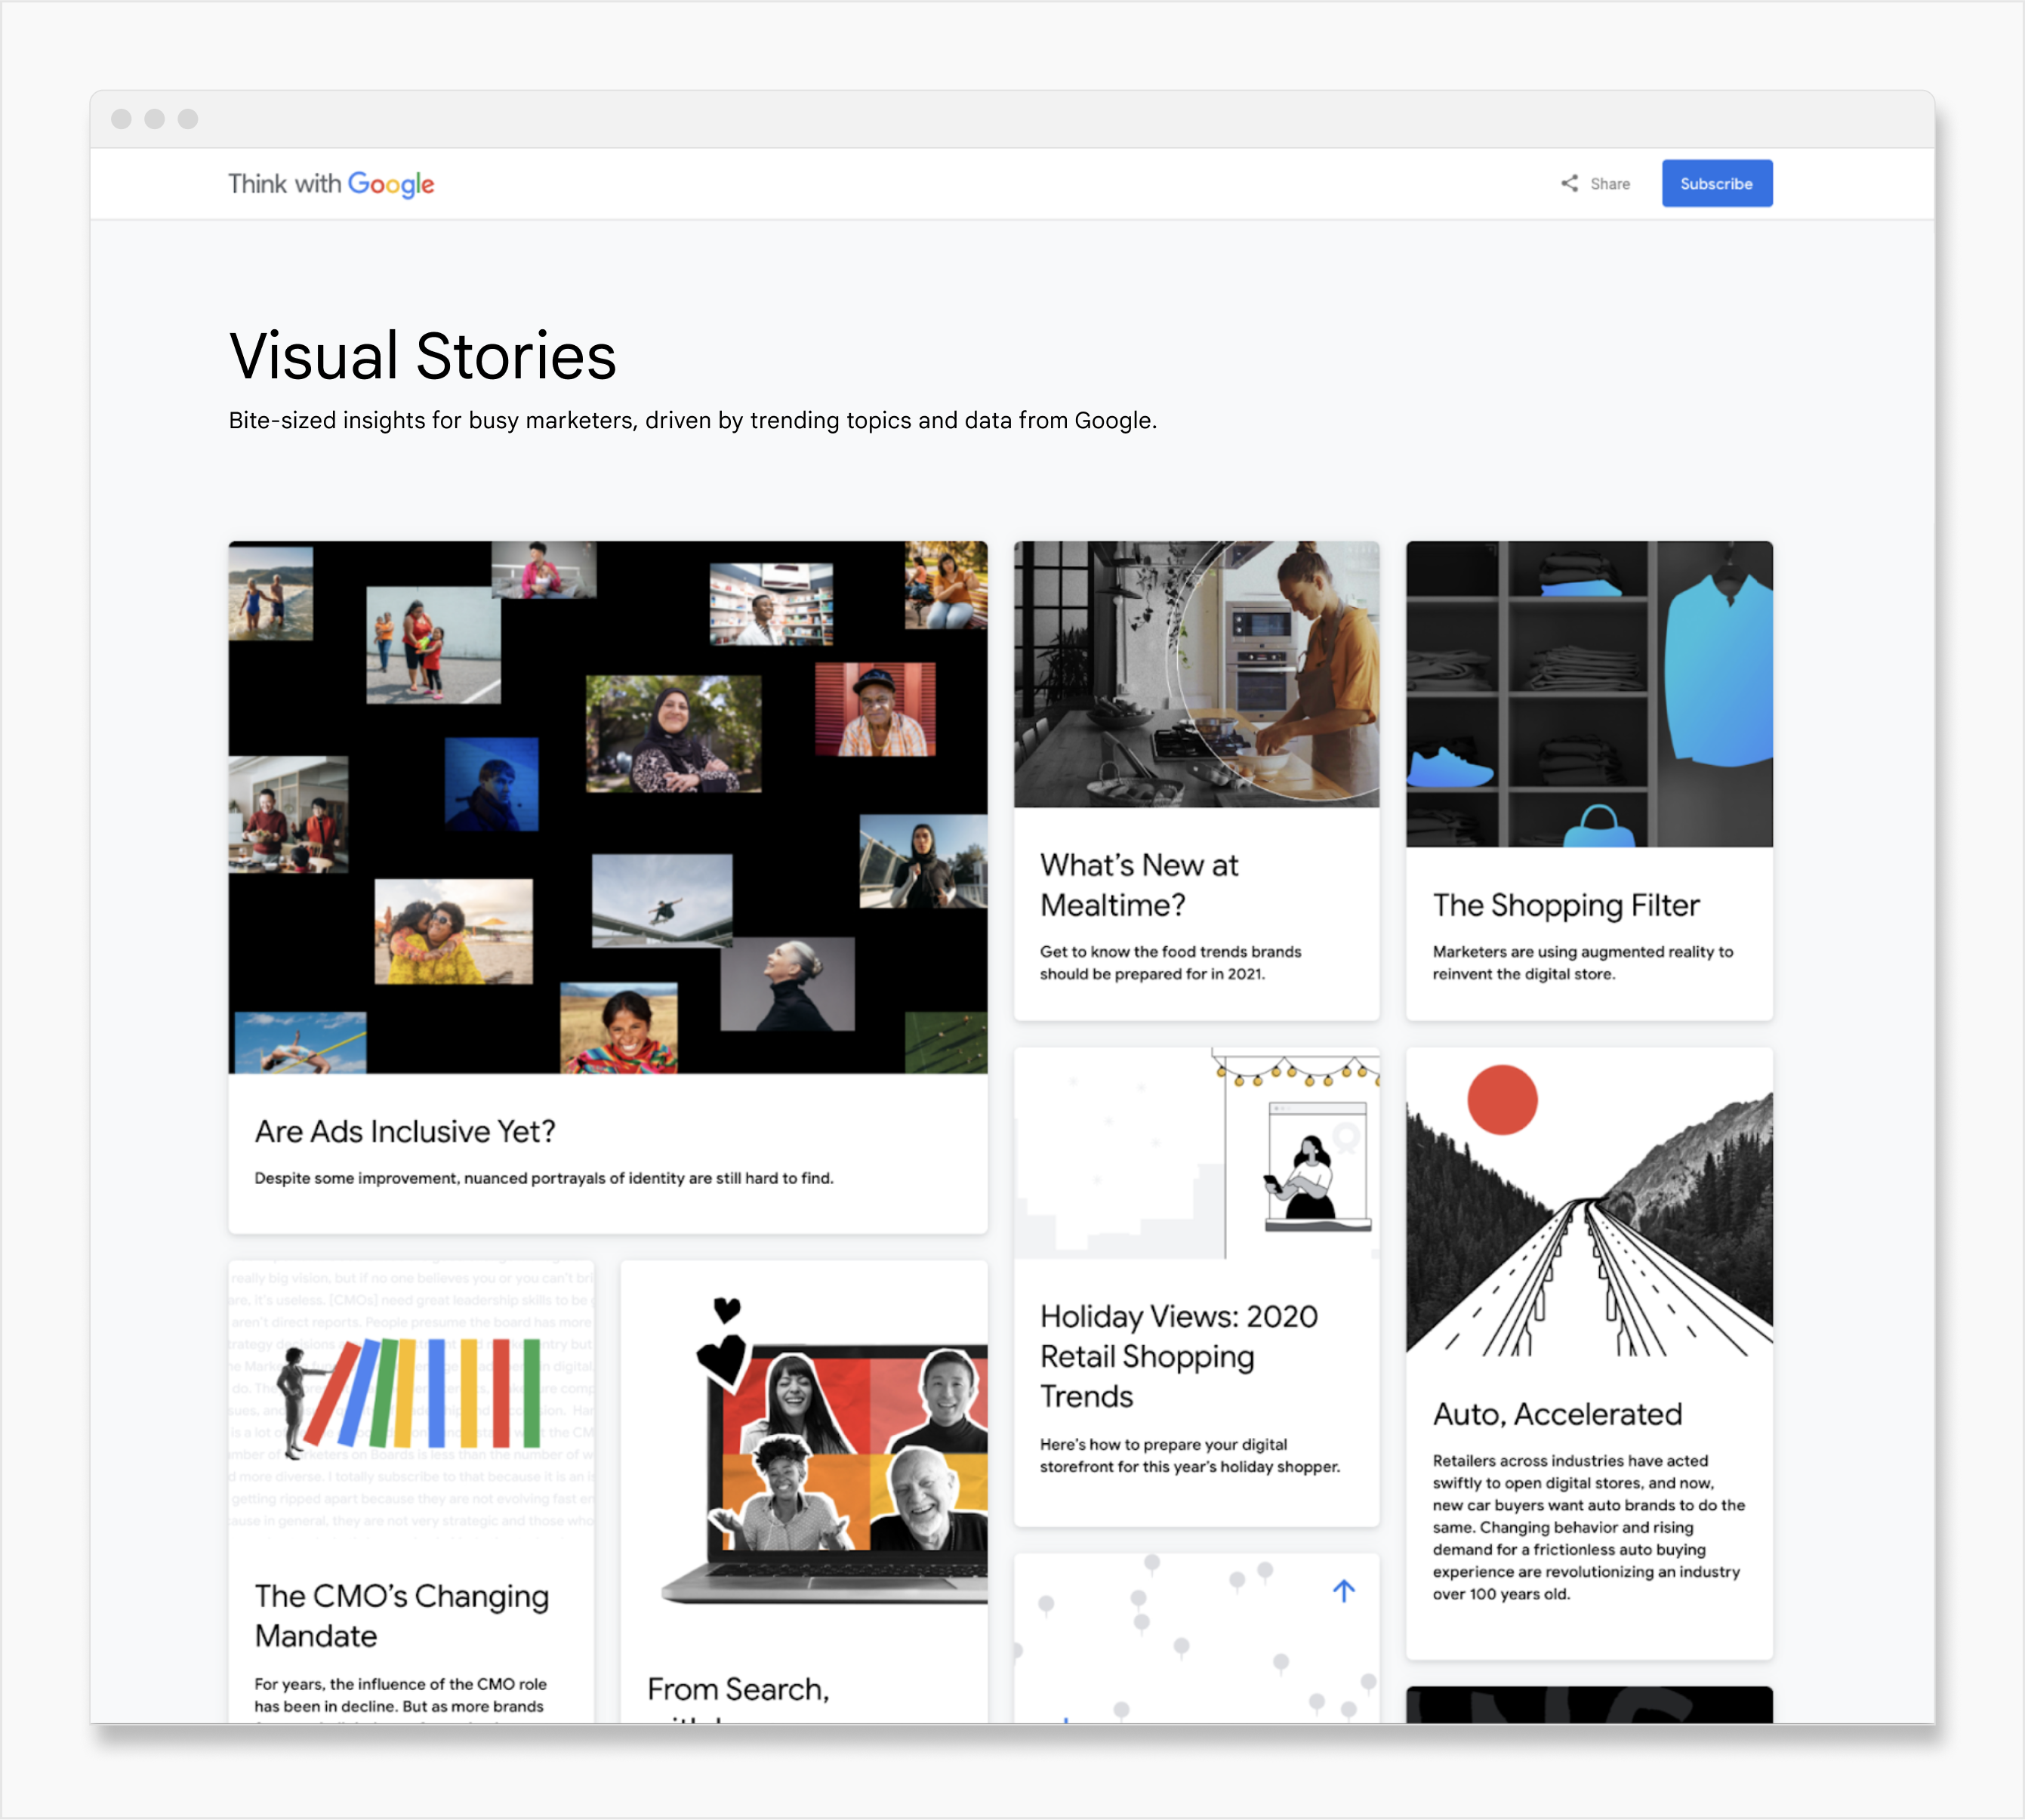 Visual Stories were originally available through a custom Think with Google product page, which we designed as a masonry-style board.